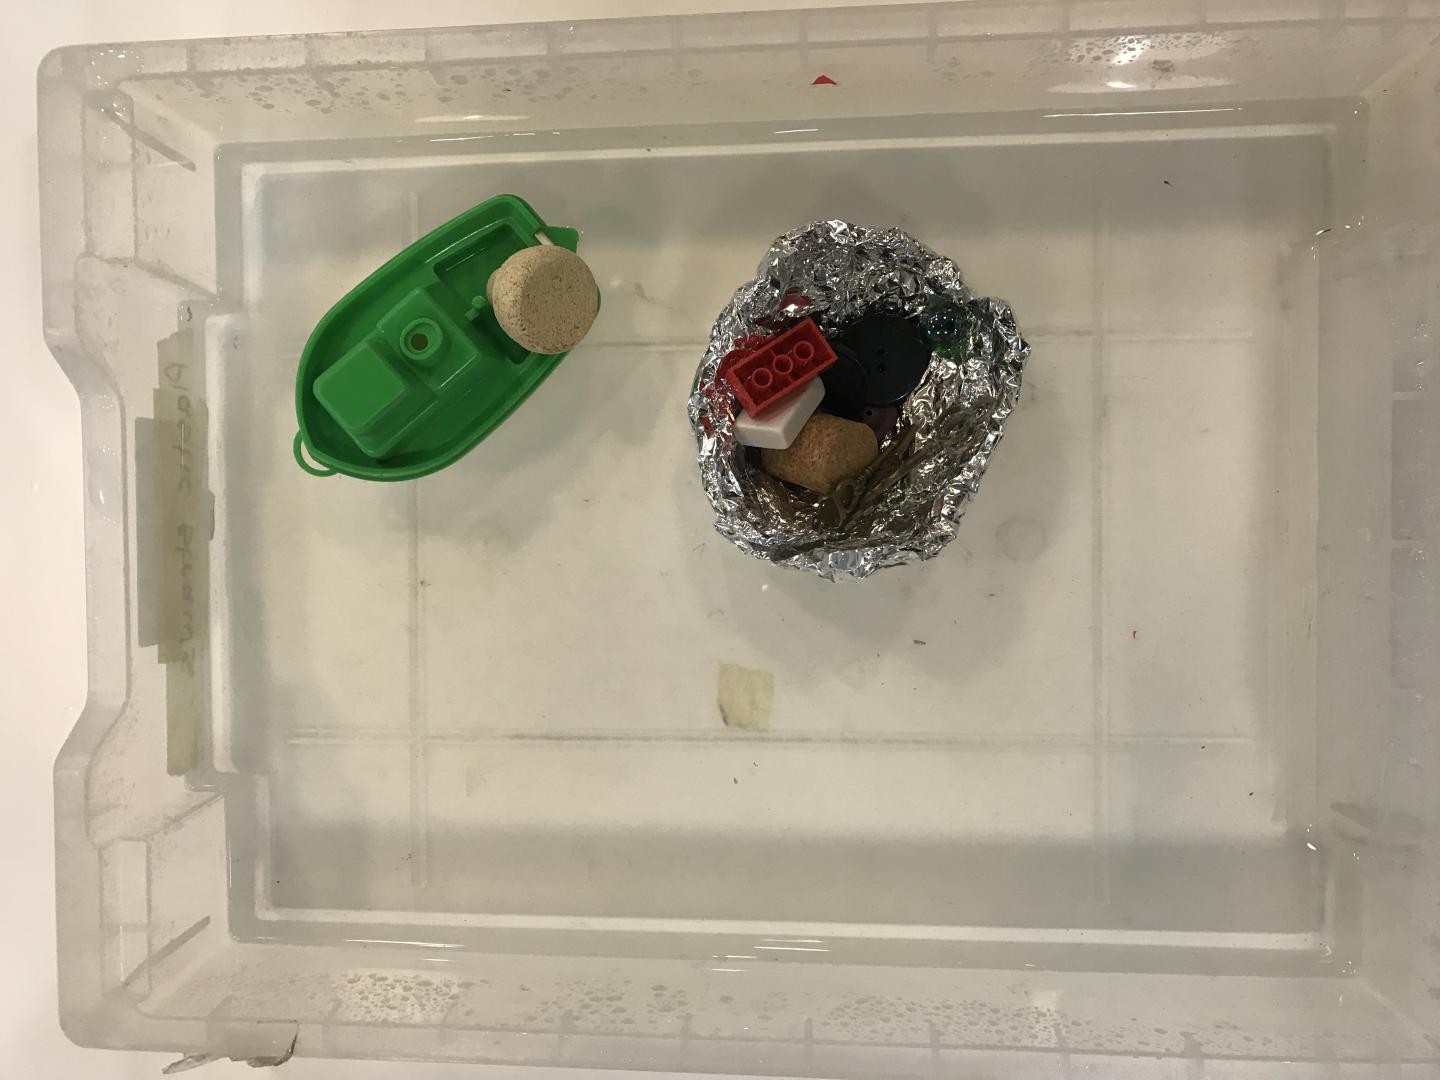 A toy boat is floating in a tray of water with a cork on the back. Another boat has been made from tin fil and has things like lego and buttons inside it. 